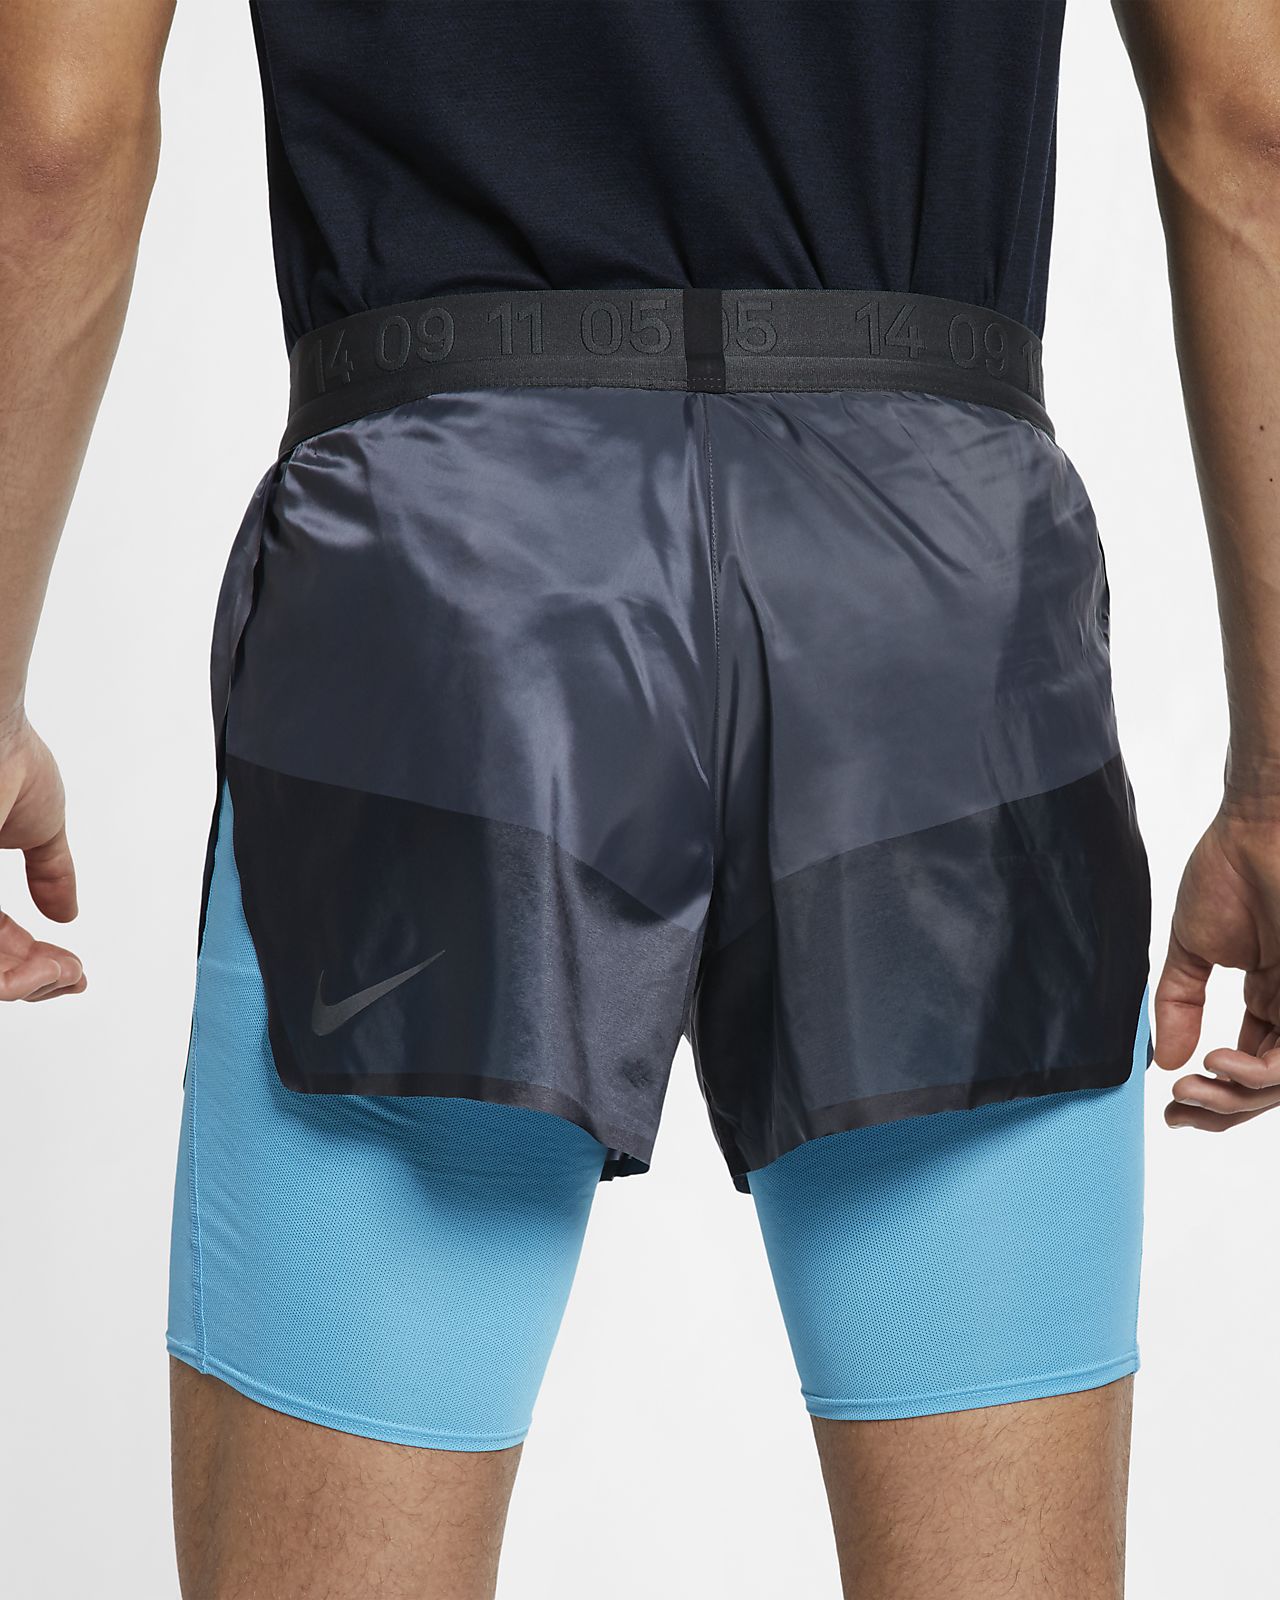 nike tech pack shorts 2 in 1